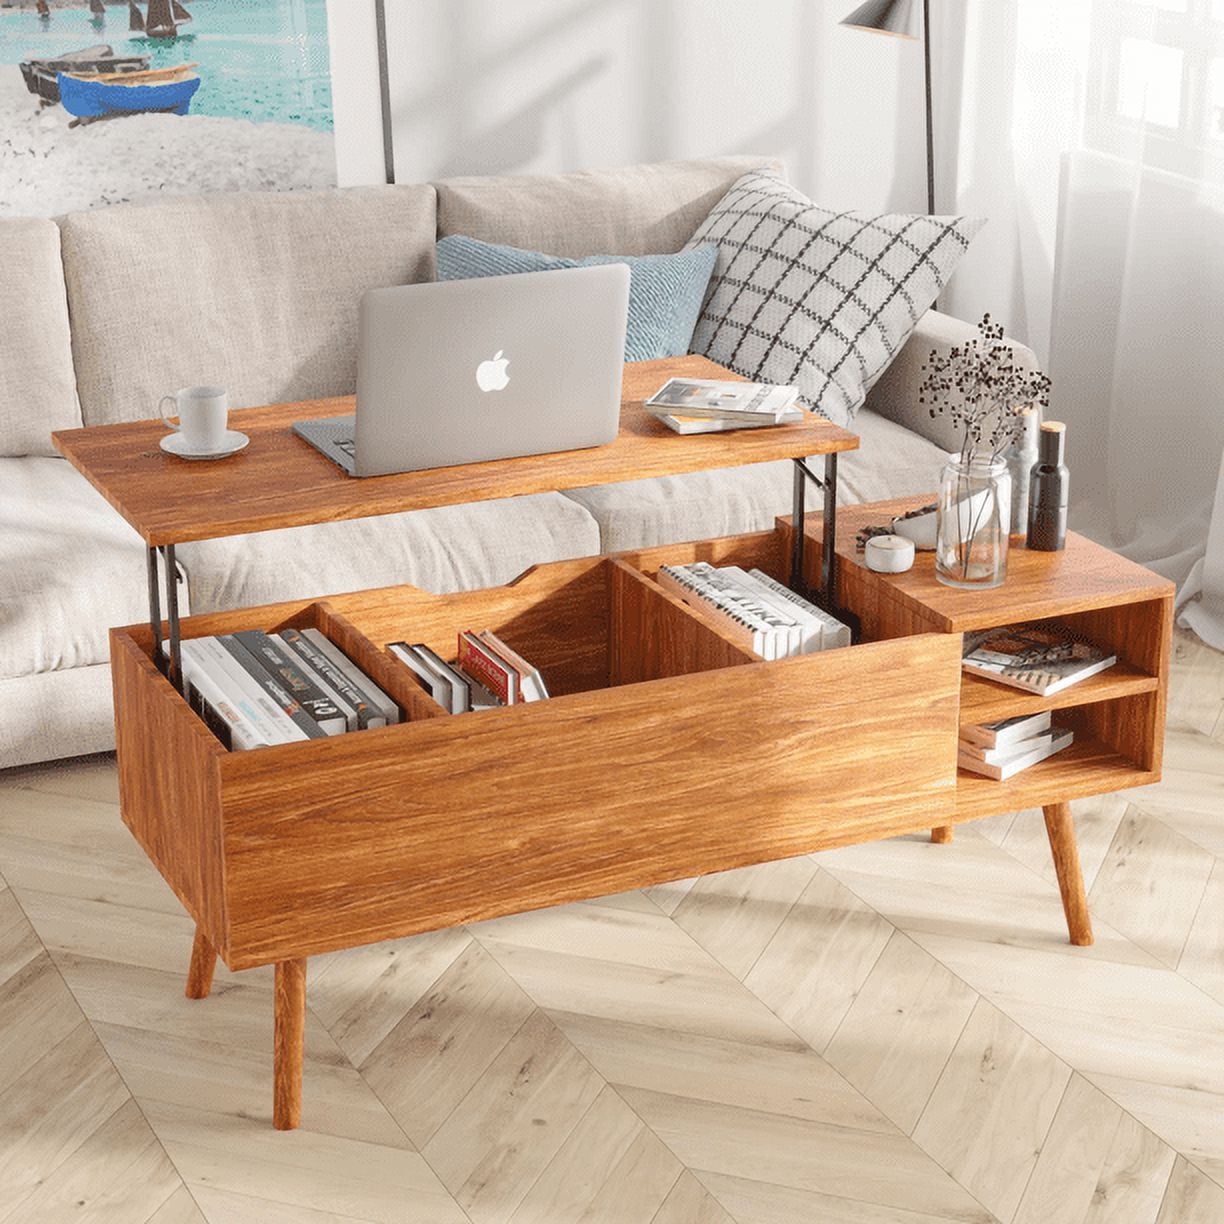 Modern Lift Top Coffee Table With Hidden Compartment Storage,adjustable Wood  Table For Living Room,brown – Walmart Intended For Wood Lift Top Coffee Tables (Photo 1 of 15)